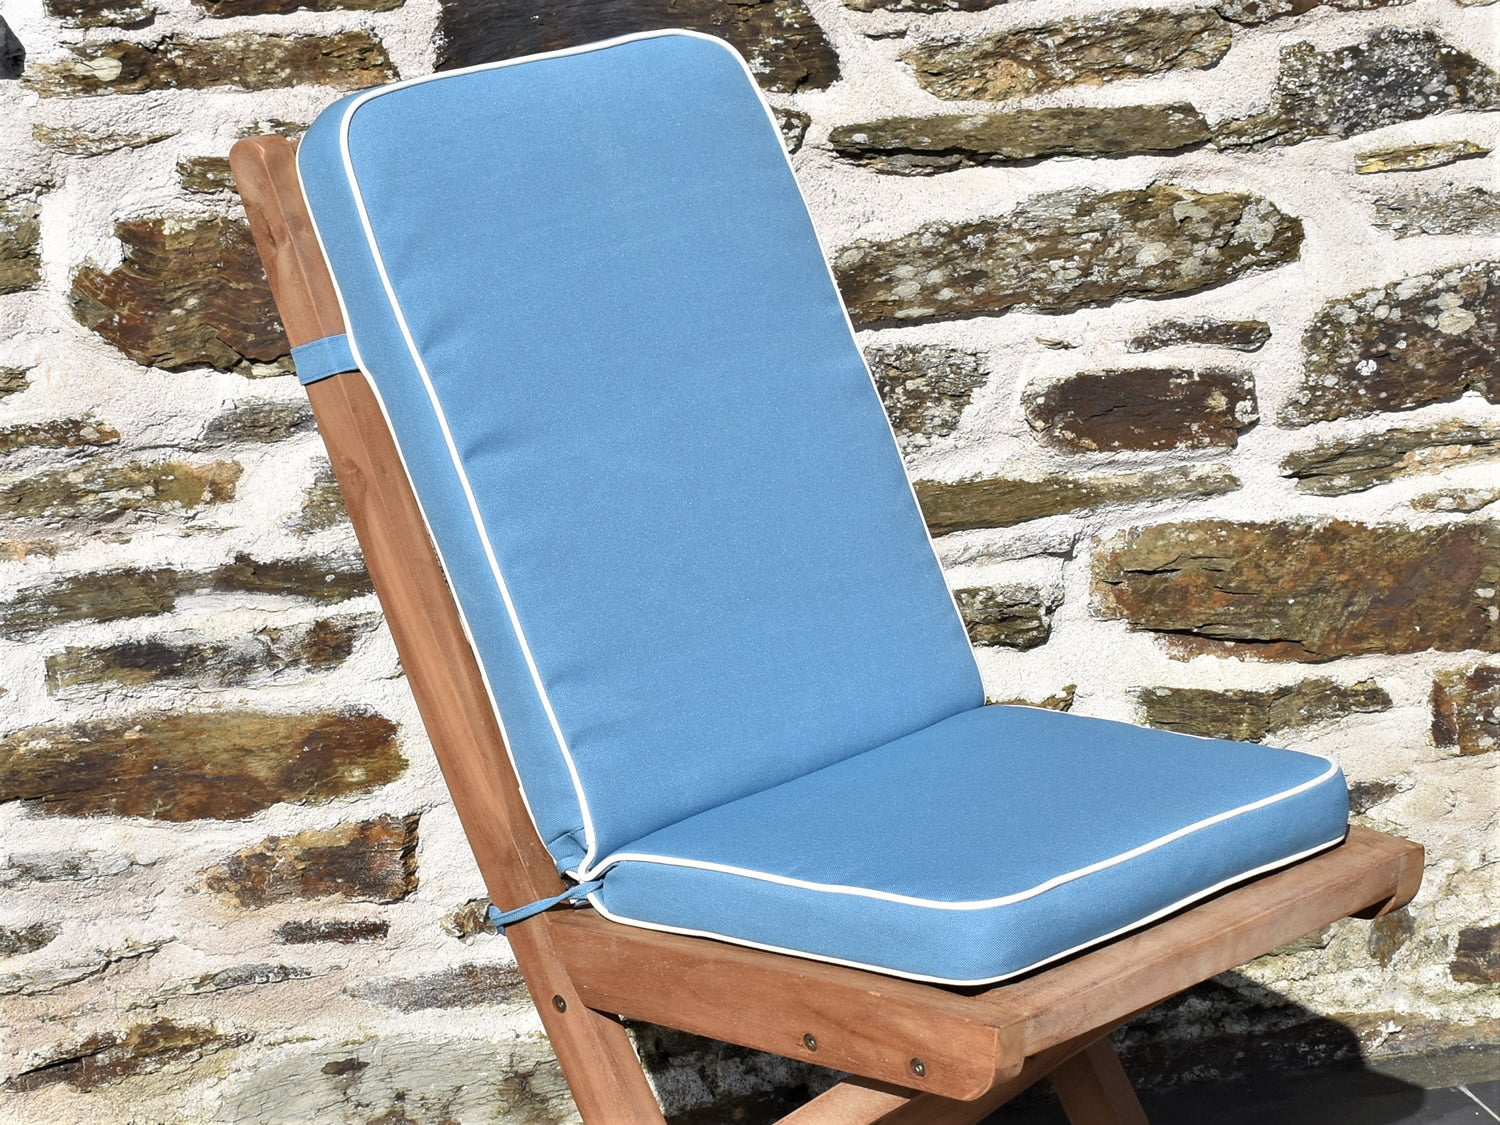 close-up detail of luxury light blue folding seat pad and back cushion, finished with contrast white piping and matching fabric ties and back strap